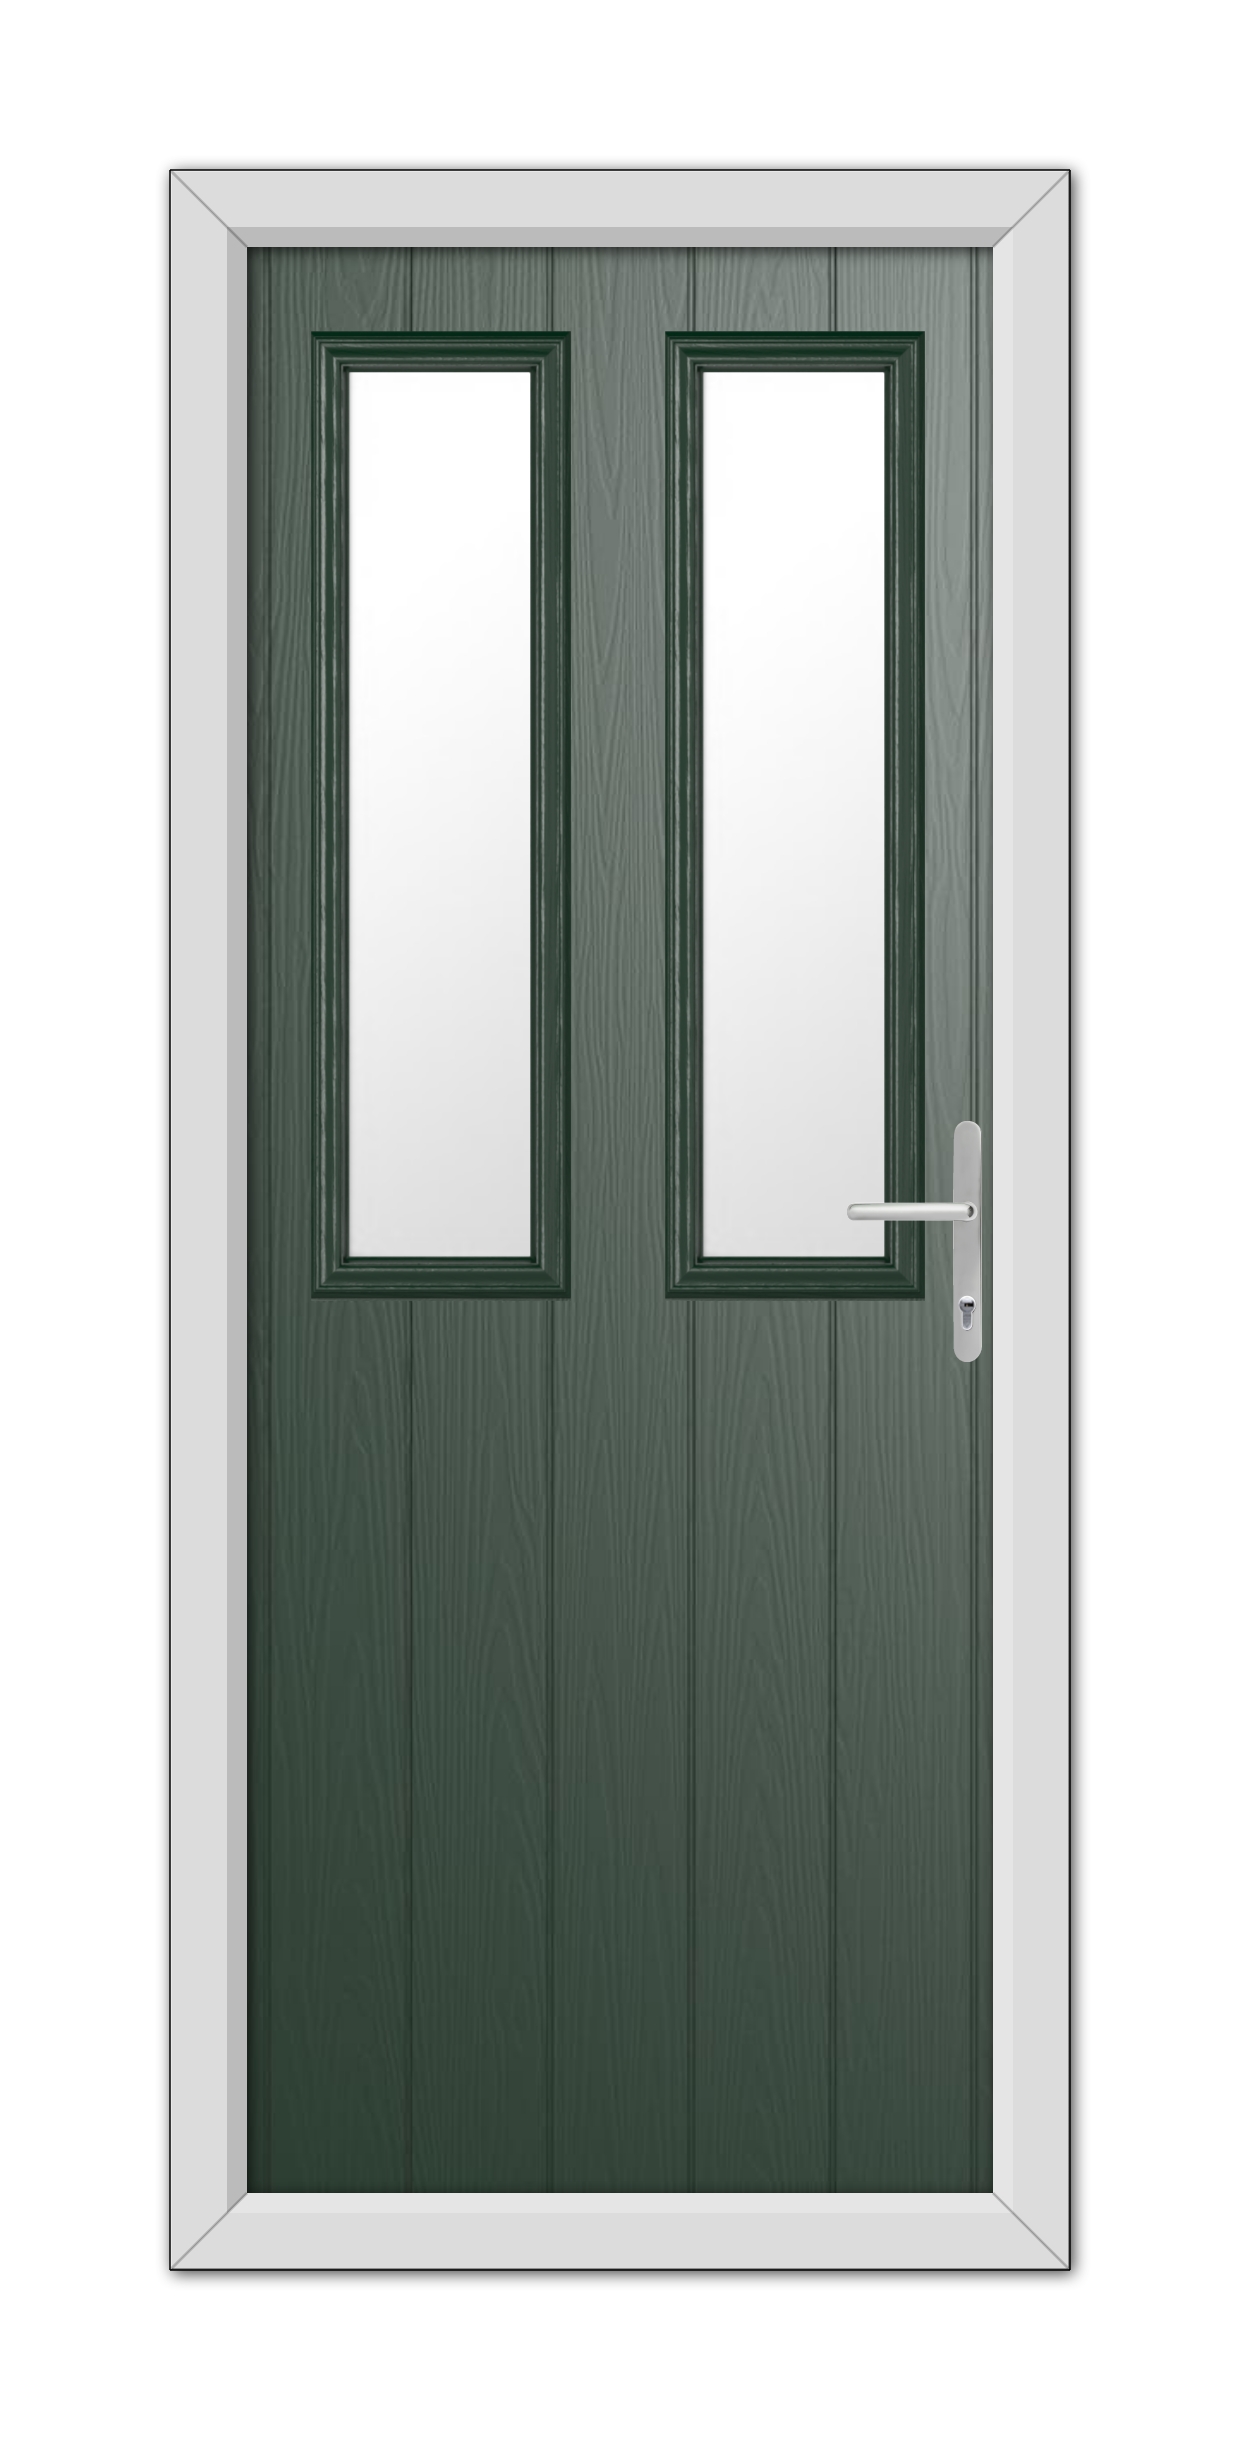 Green Wellington Composite Door 48mm Timber Core with a dark green wooden texture and vertical glass panels, featuring a white frame and a modern handle on the right.